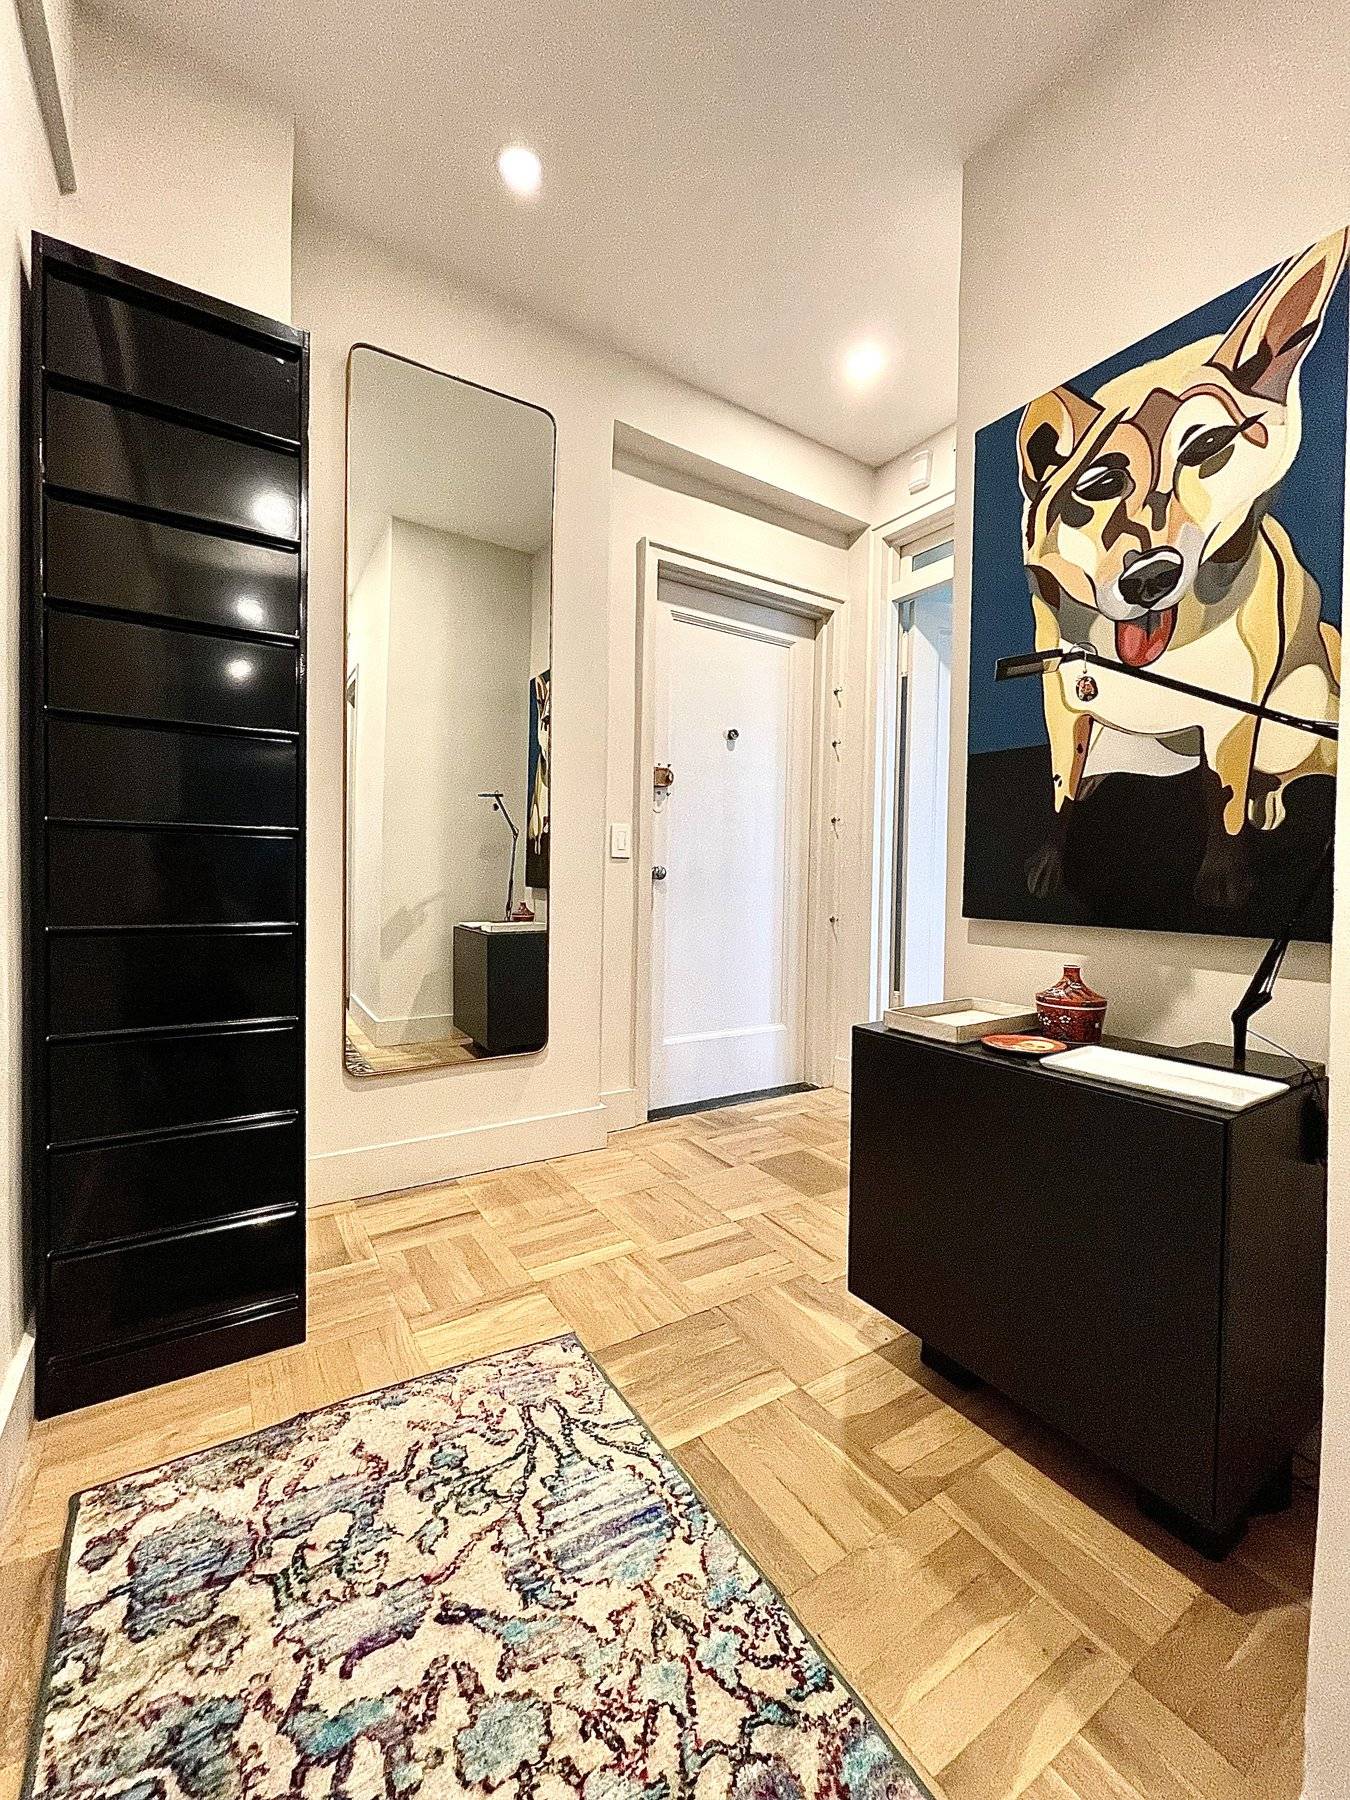 Nestled in the Heart of Castle Village, Washington Heights most sought after co op complex, this beautiful, newly renovated apartment has been meticulously kept and decorated.